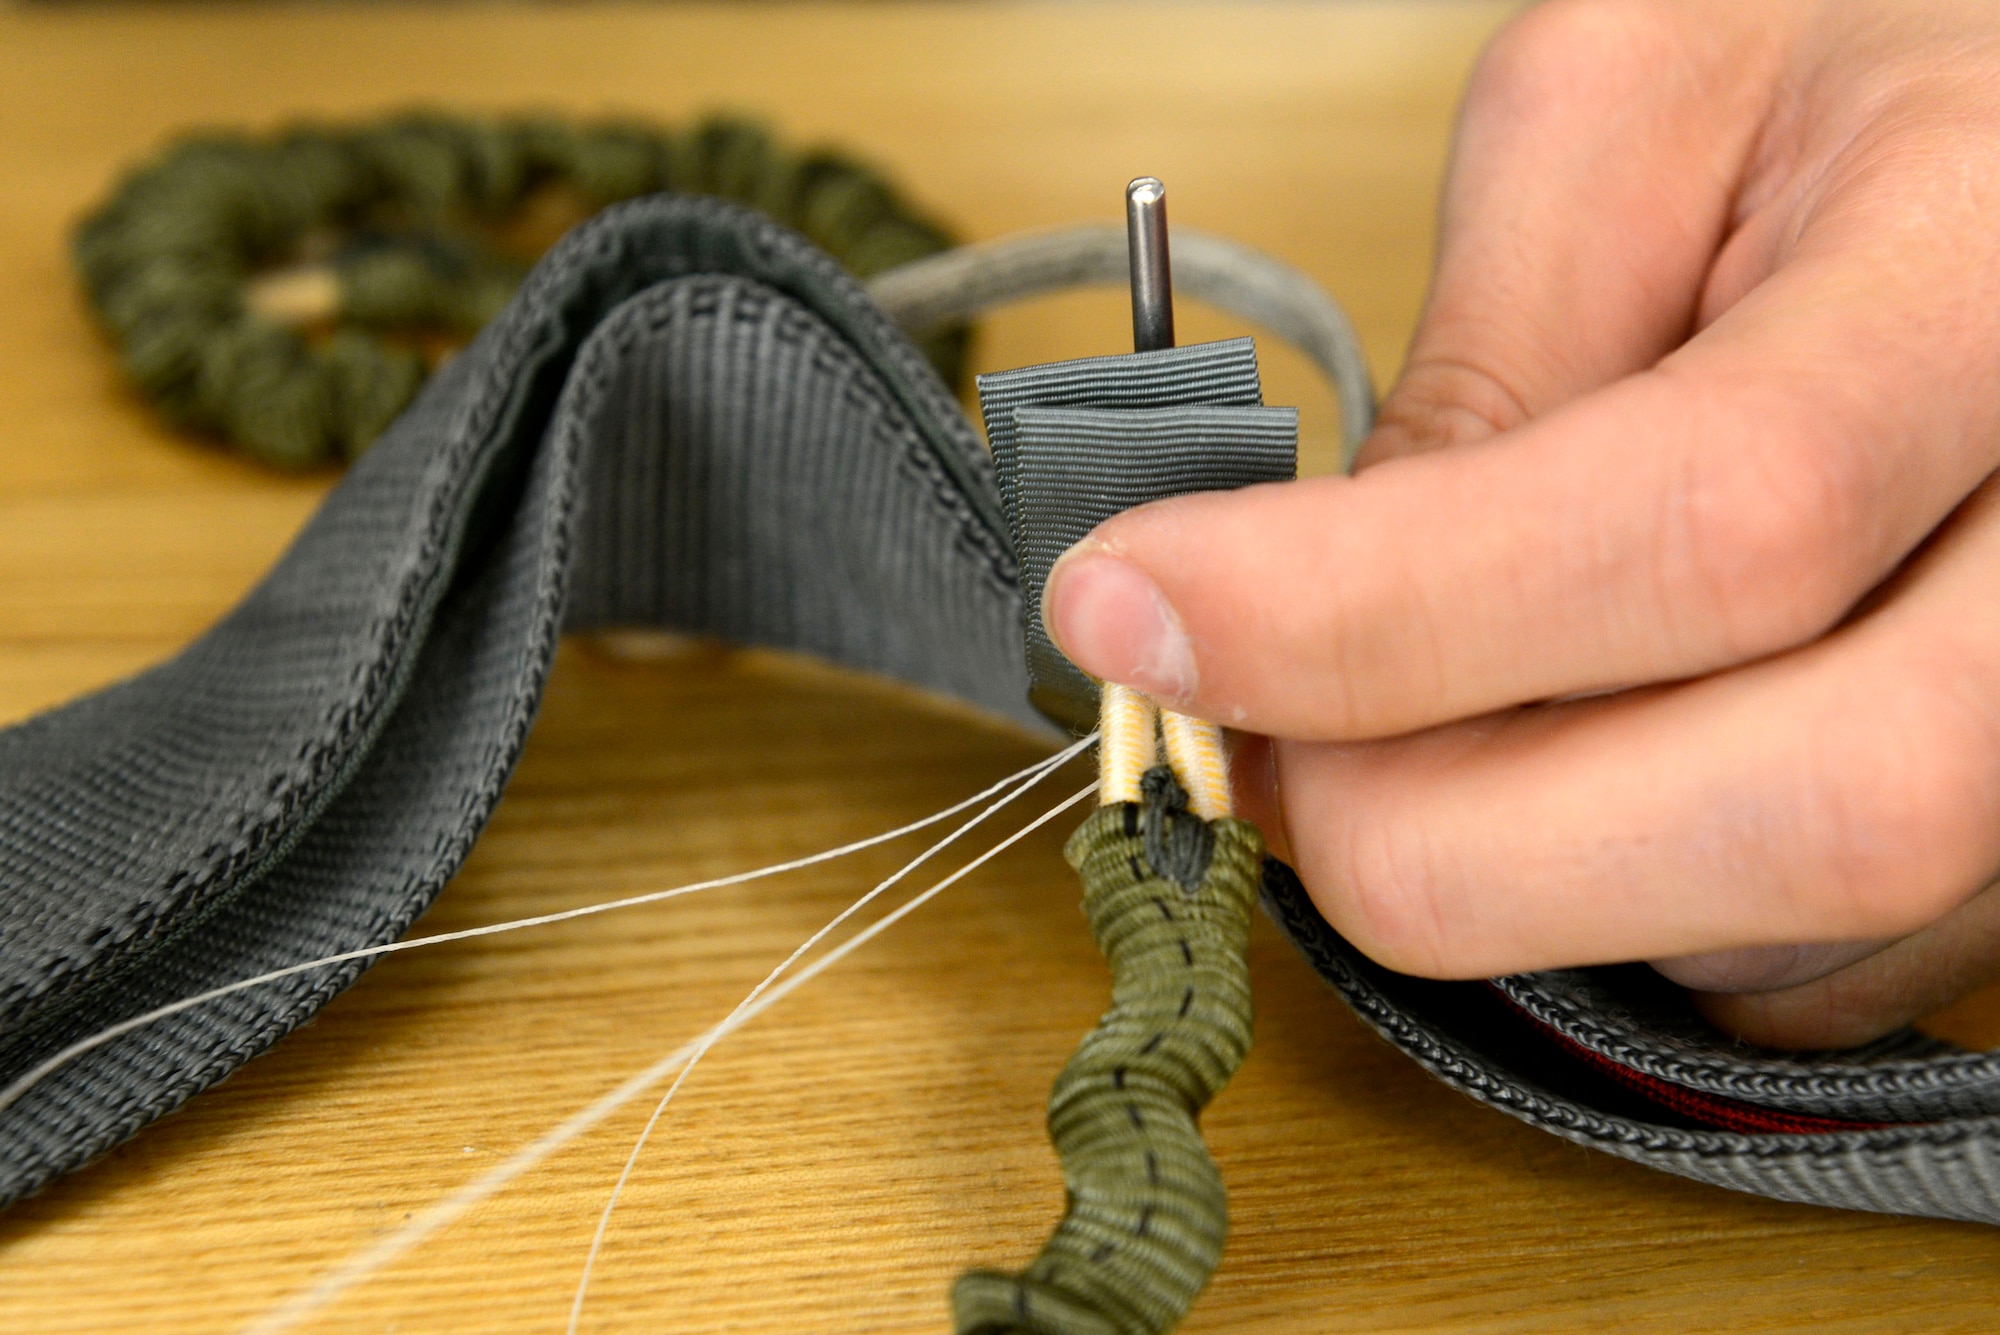 A U.S. Air Force Airman rigs the risers of the ACES II parachute system at Shaw Air Force Base, S.C., Oct. 8, 2015. The risers are the lowest part of the entire assembly and connect the parachute to the harness worn by the pilot during flight.  The elastic cord assembly keeps the risers secure during flight. (U.S. Air Force photo by Airman 1st Class Christopher Maldonado/Released) 